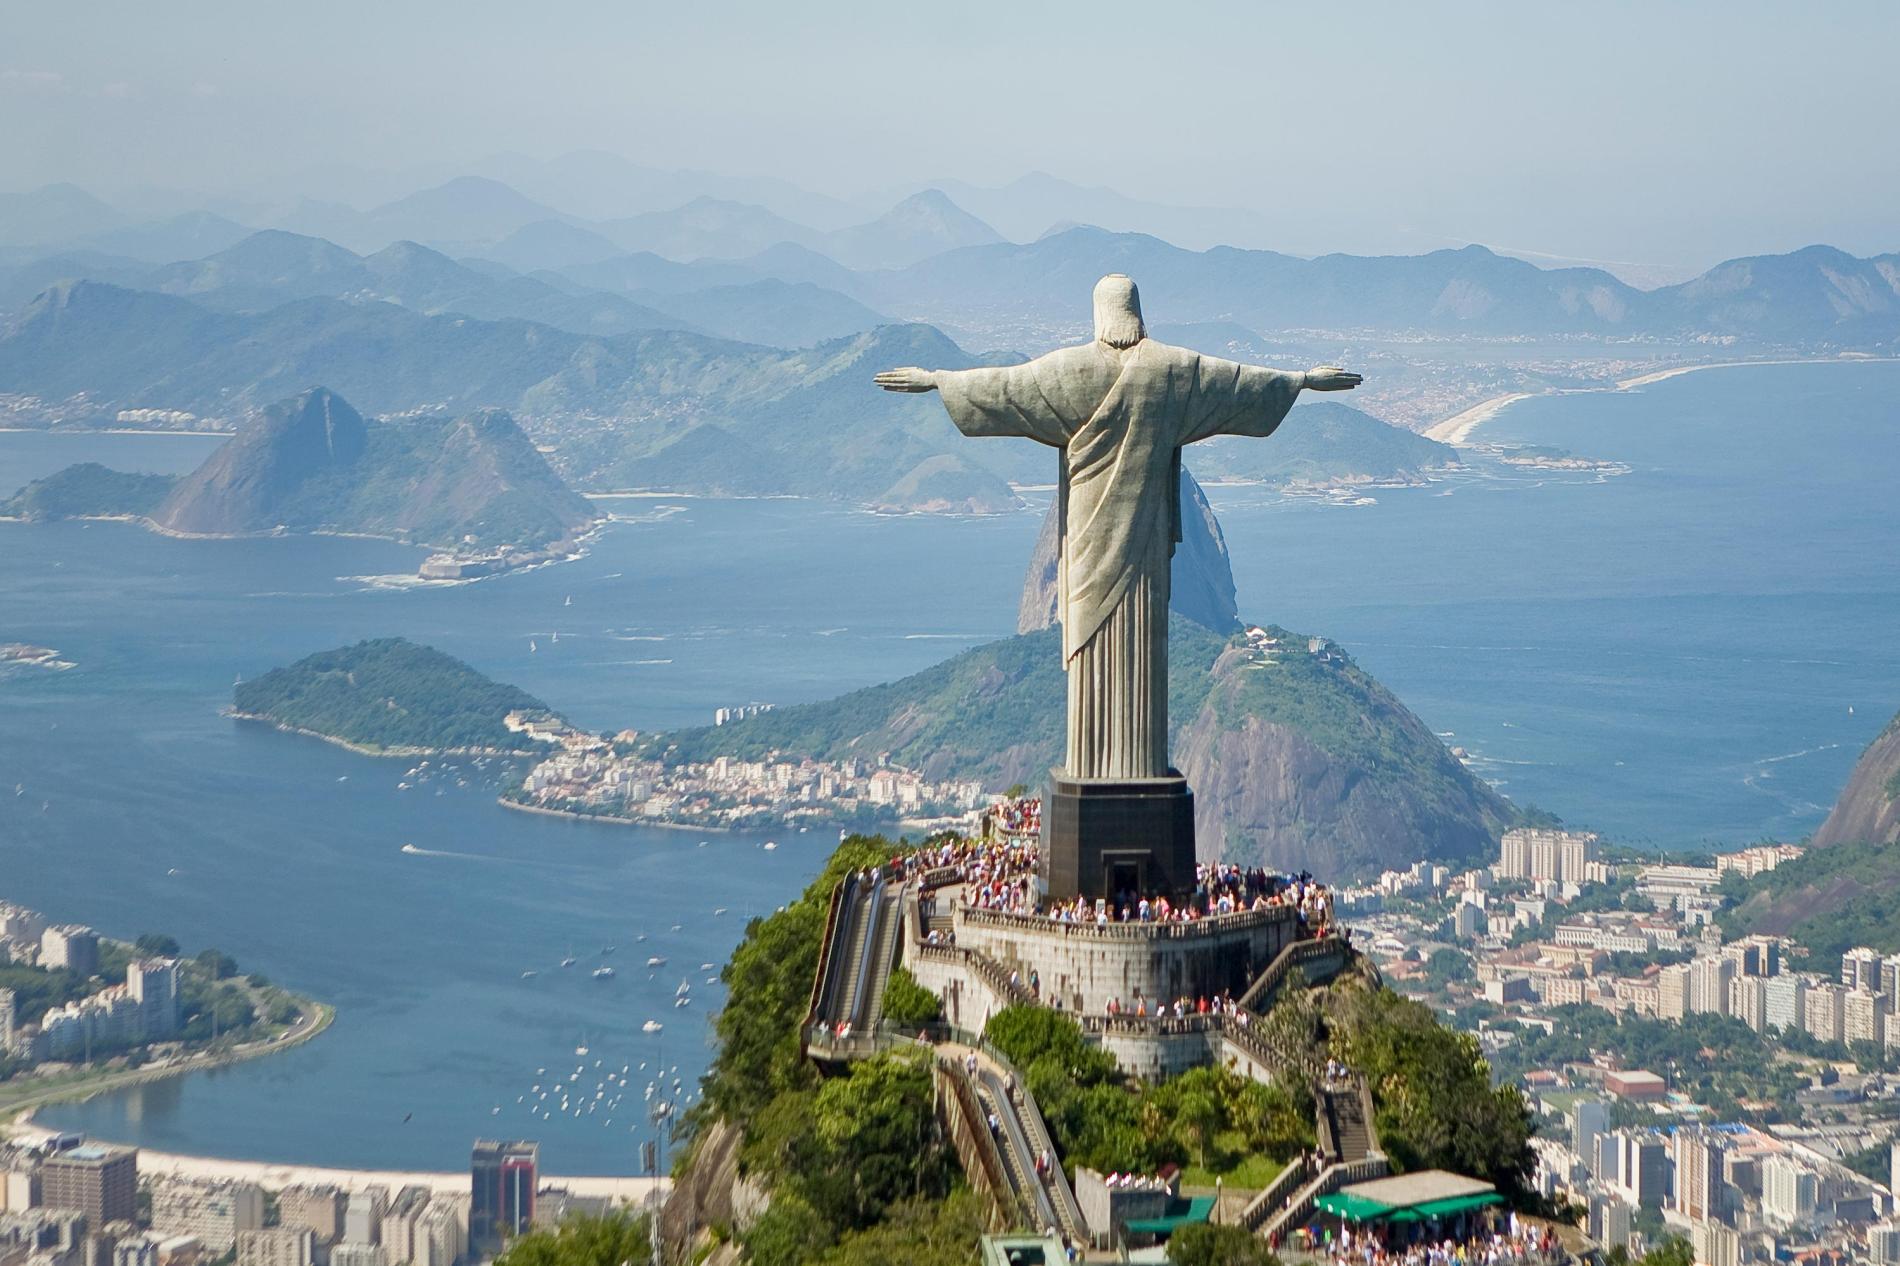 New York to Rio de Janeiro Brazil $542-$562 RT Airfares on LATAM or Copa Airlines BE (Travel September - October 2023)